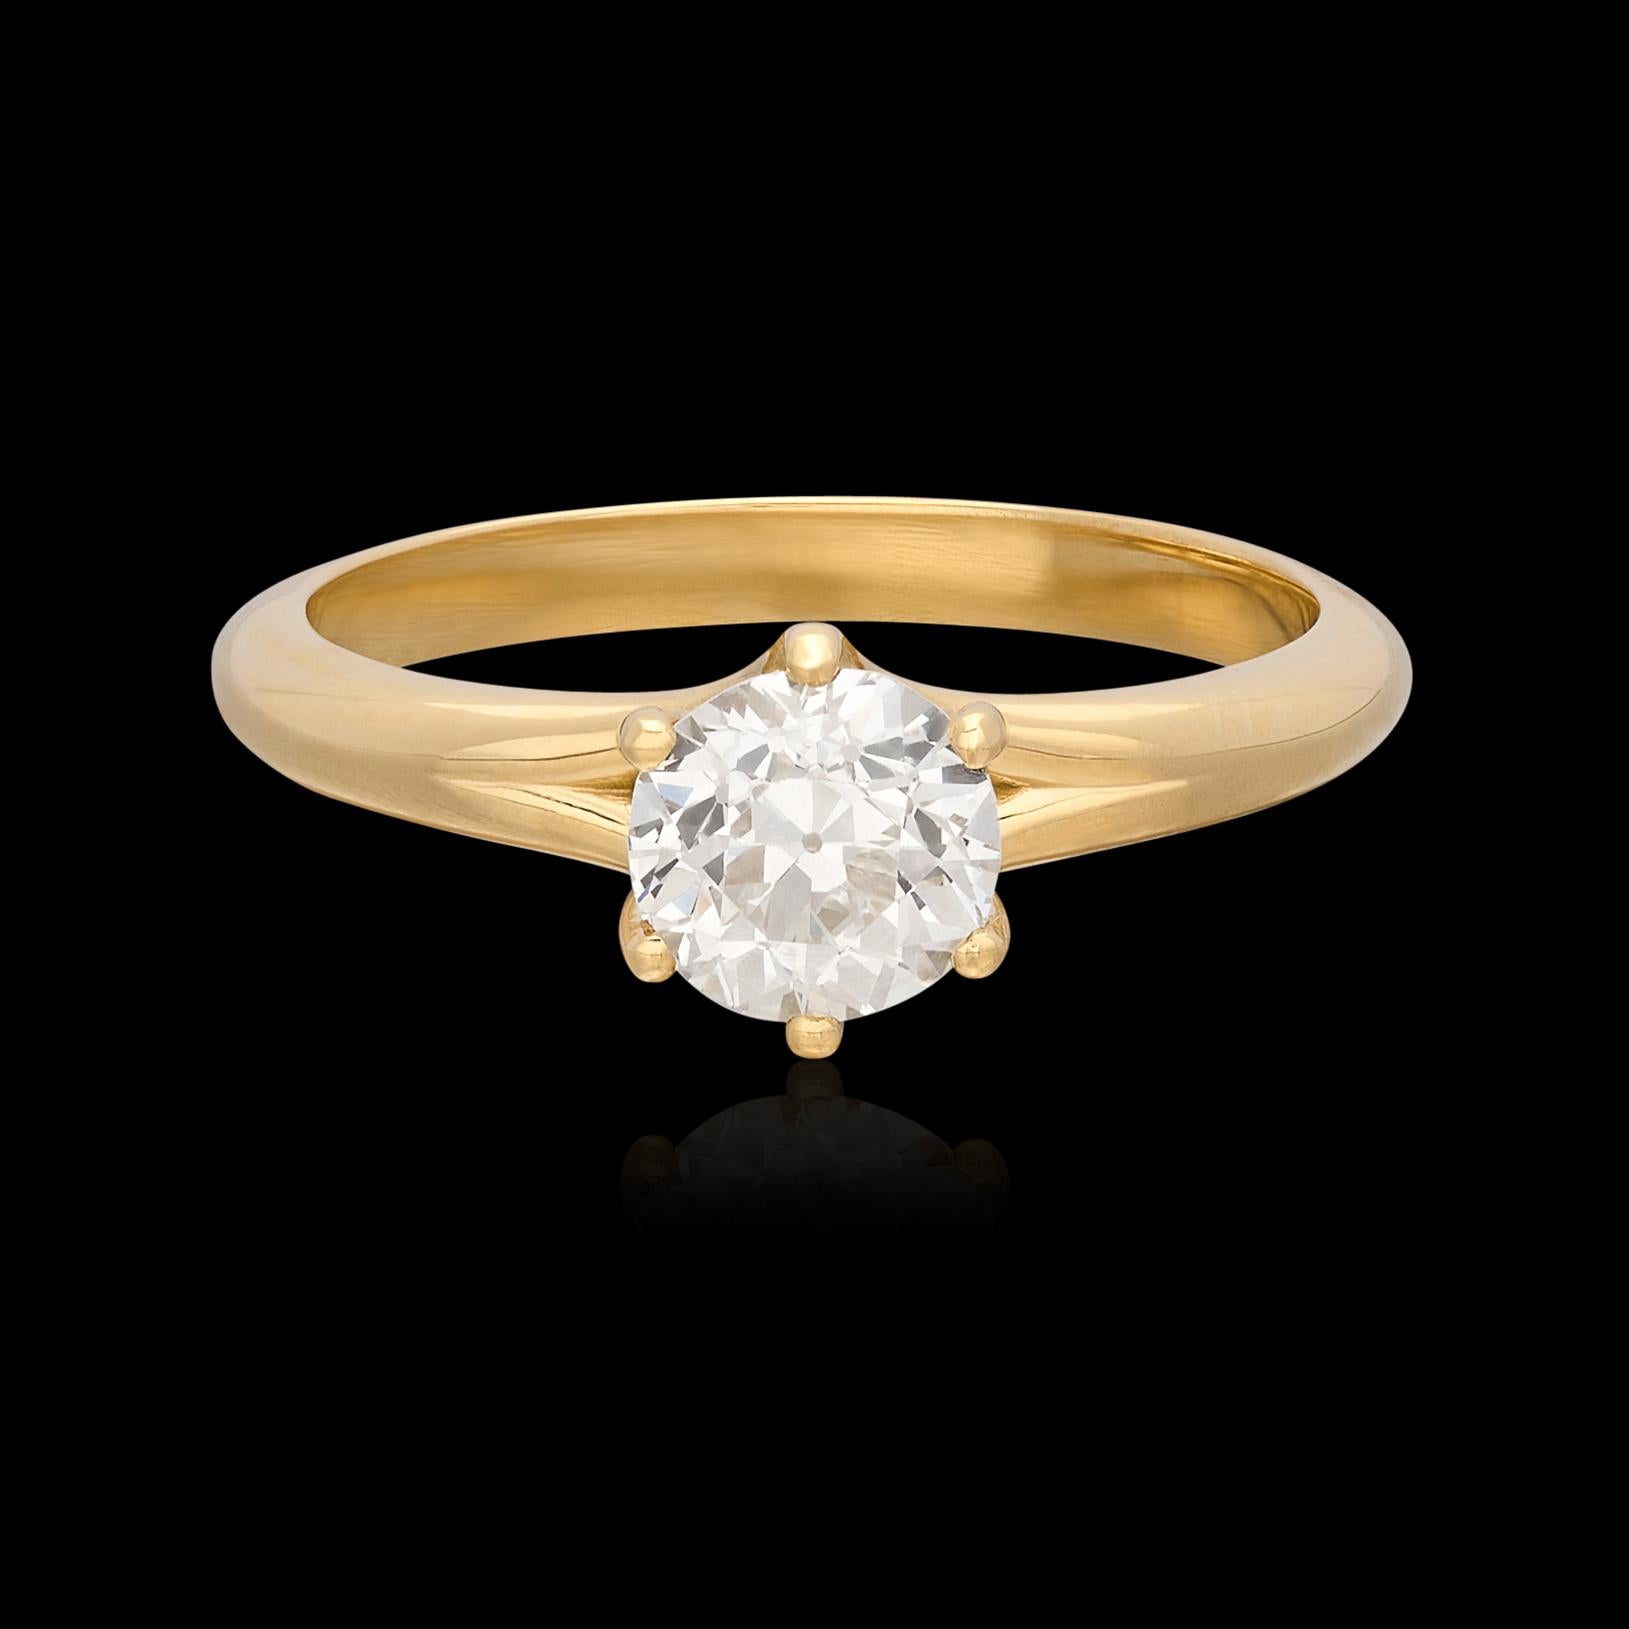 Old meets new in this custom 18 karat yellow gold engagement ring featuring a GIA graded Old Euro Cut Diamond. The twist basket design perfectly showcases the antique solitaire diamond in a simple but stunning 6-prong setting with split shank. The